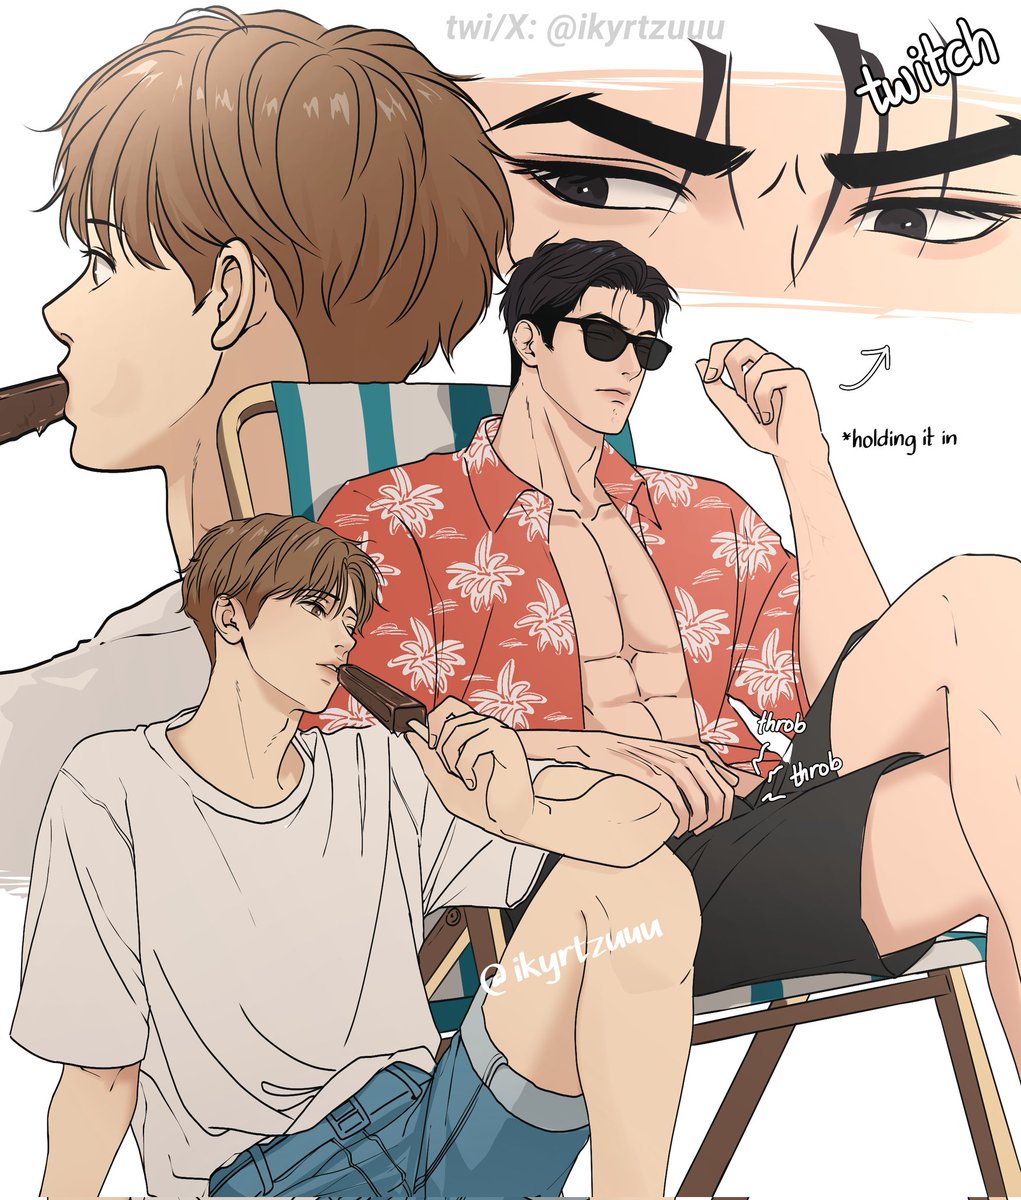 Is it cold or...hot? 🏖️

#vacation #jinx #징크스 @_MinGwa